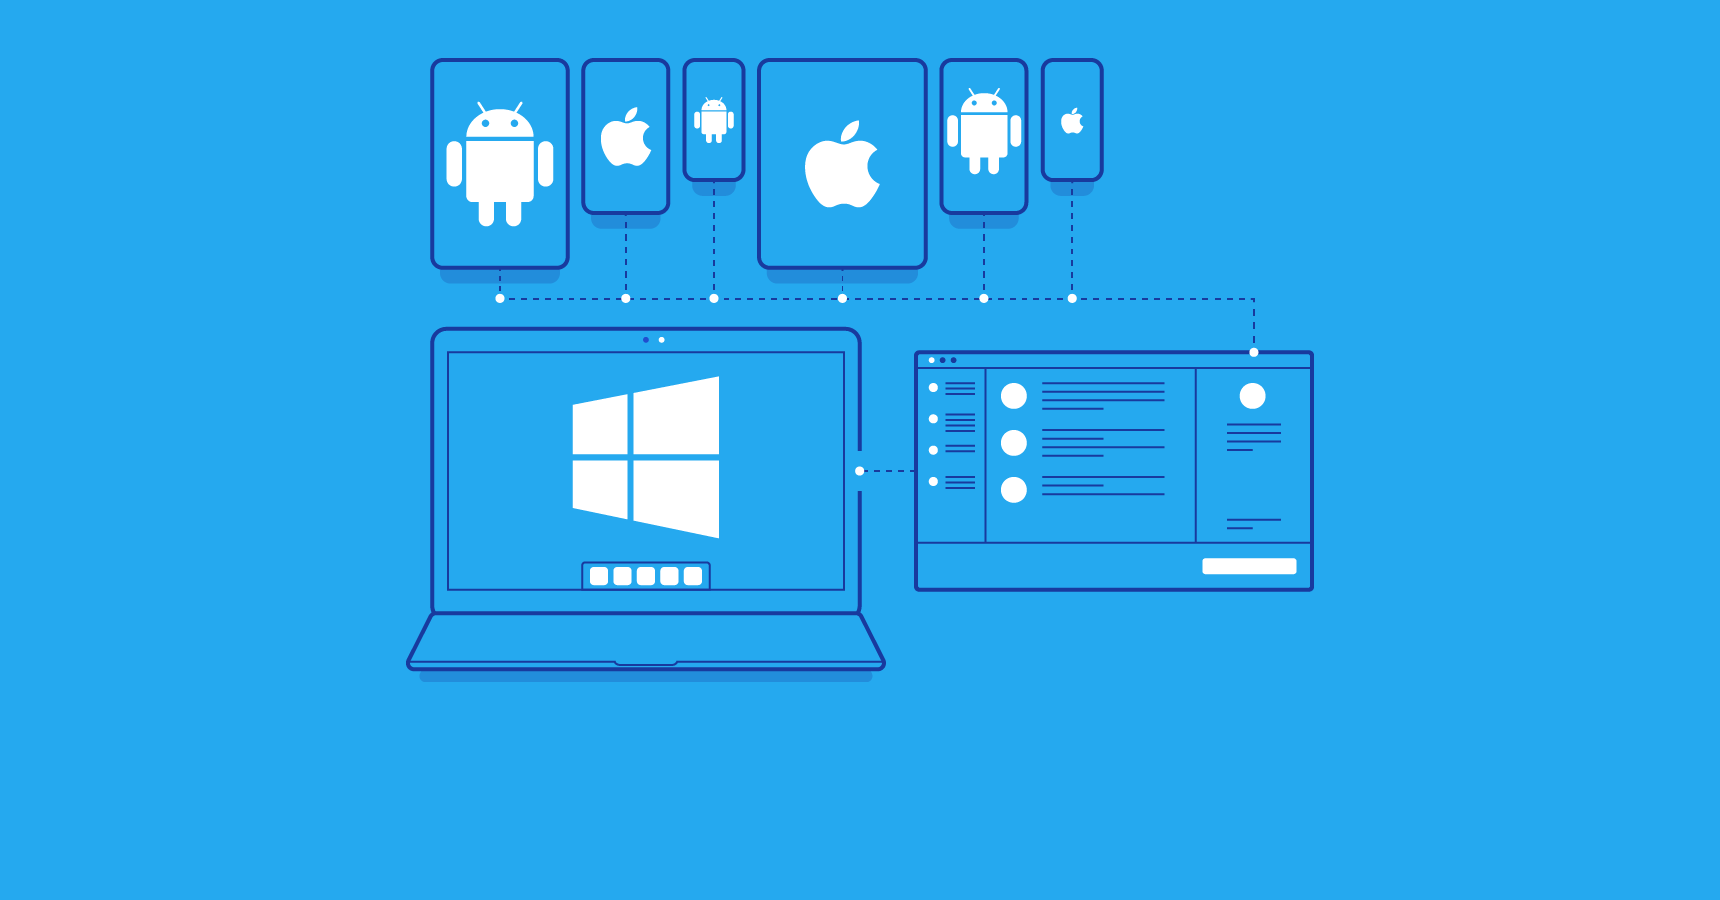 How to Make an Android and iOS App in C# on Mac